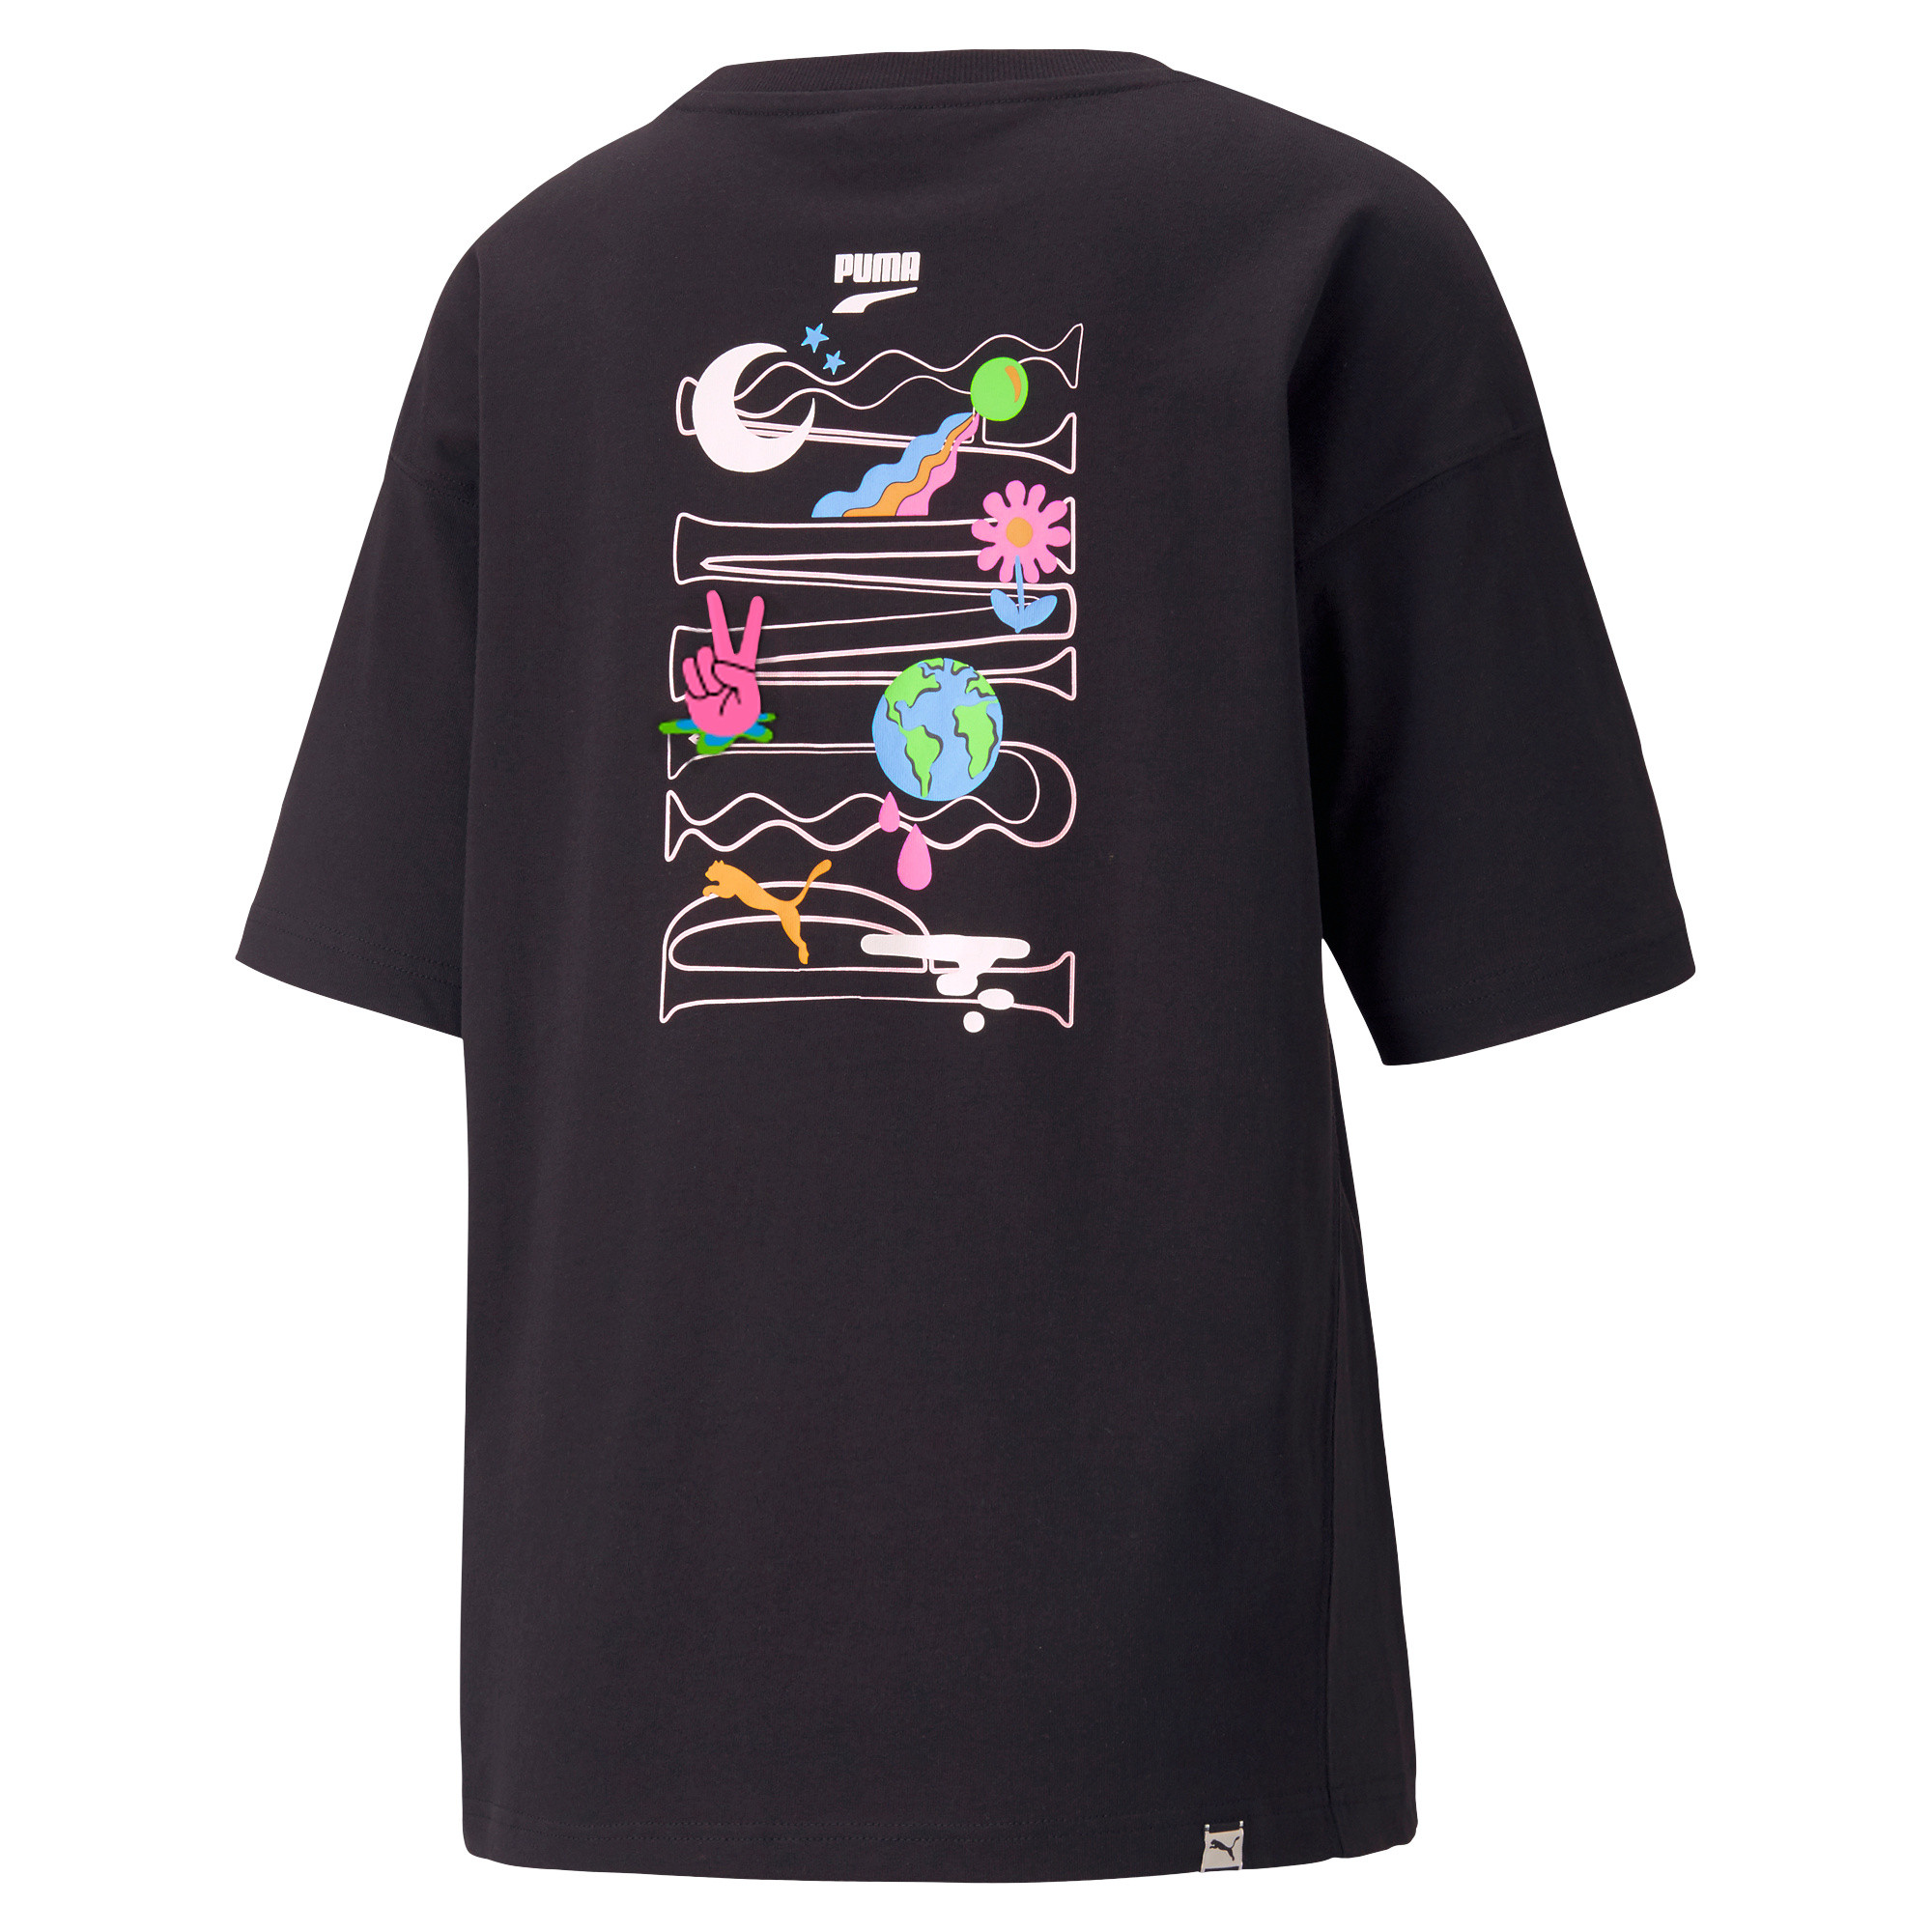 Downtown Graphic Tee, Black, large image number 1